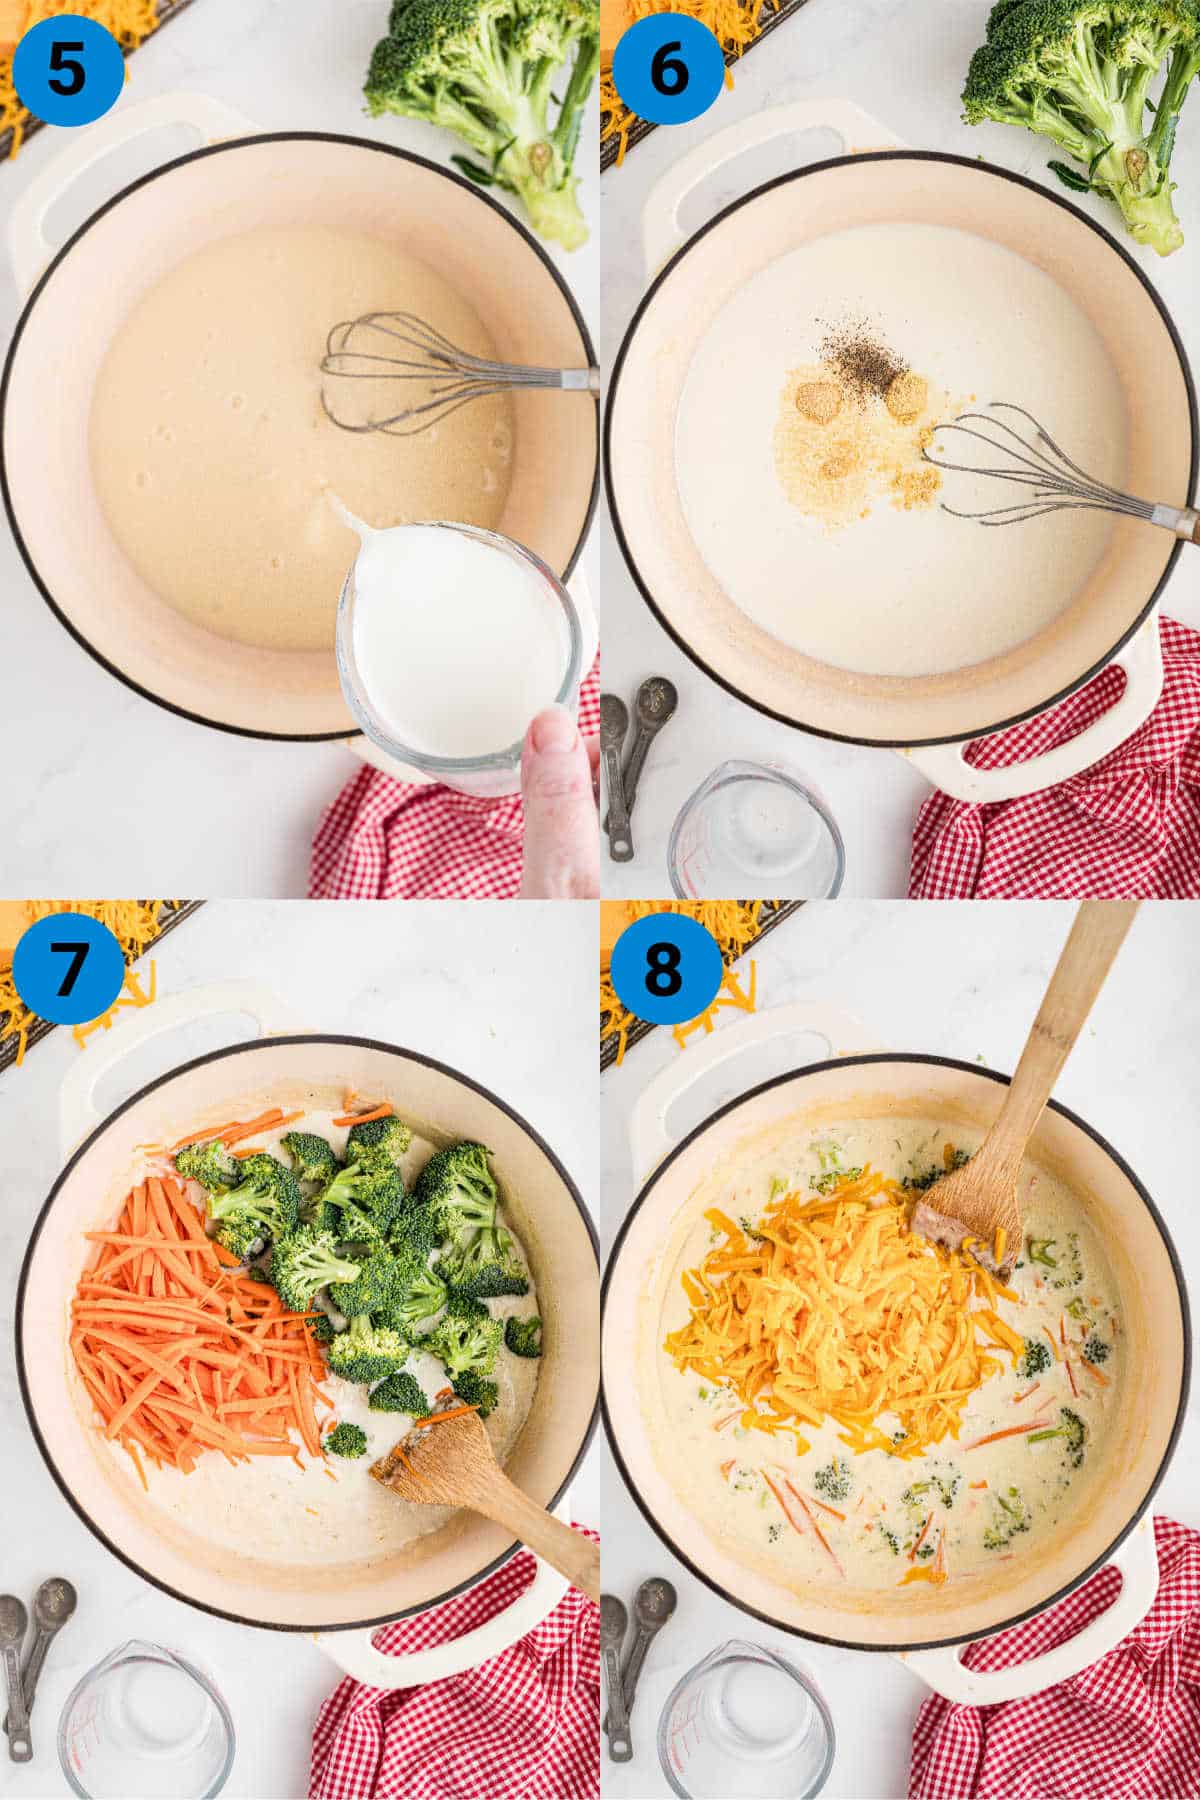 A collage of four images showing how to make a 30 minute broccoli cheddar soup.